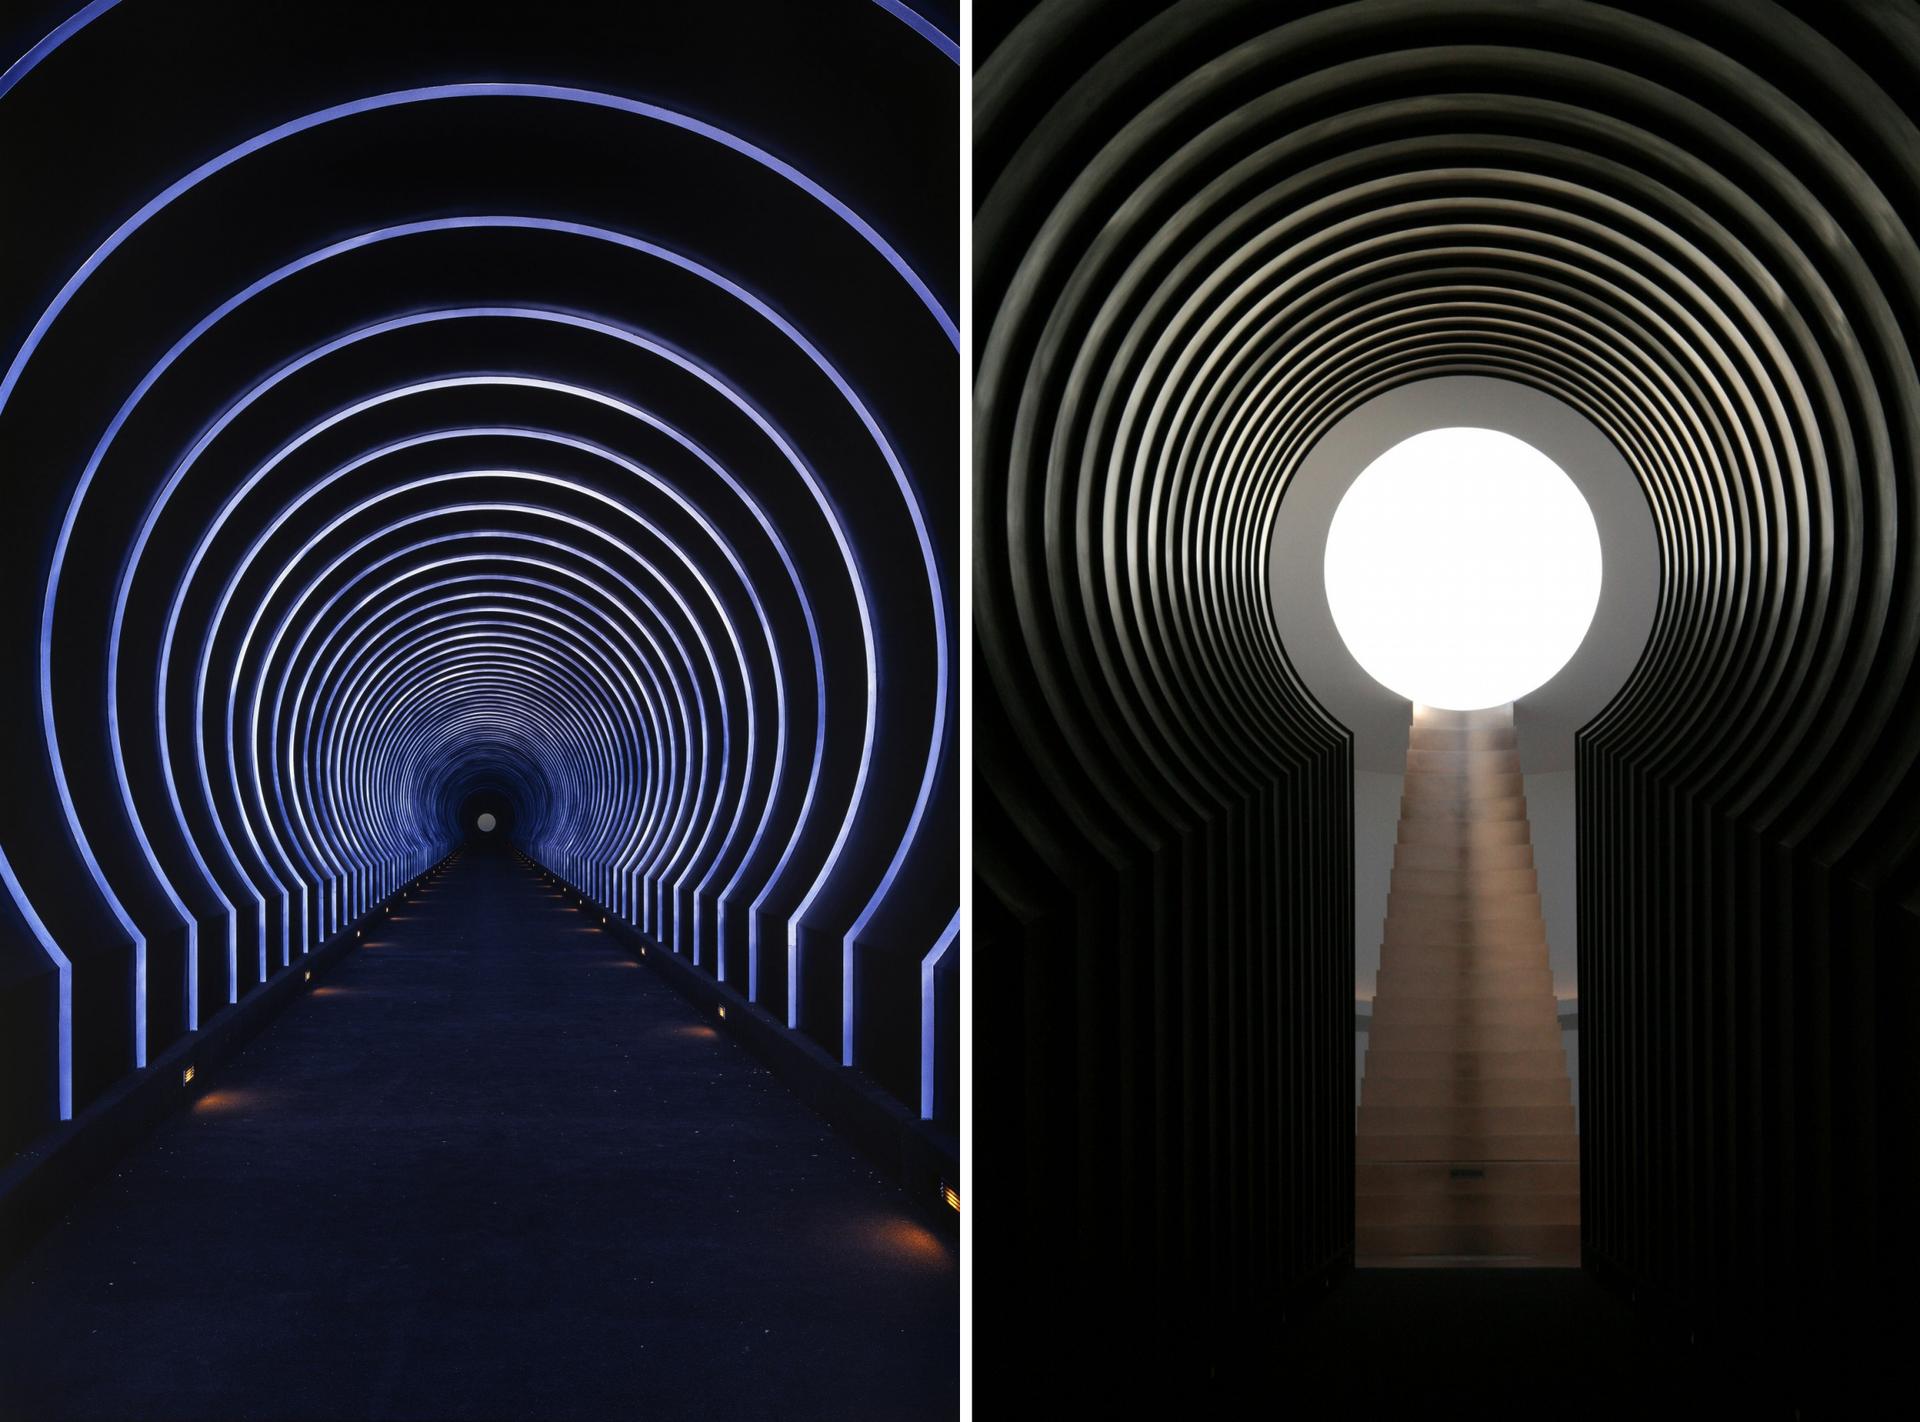 Views of the Alpha (East) Tunnel inside James Turrell’s Roden Crater.